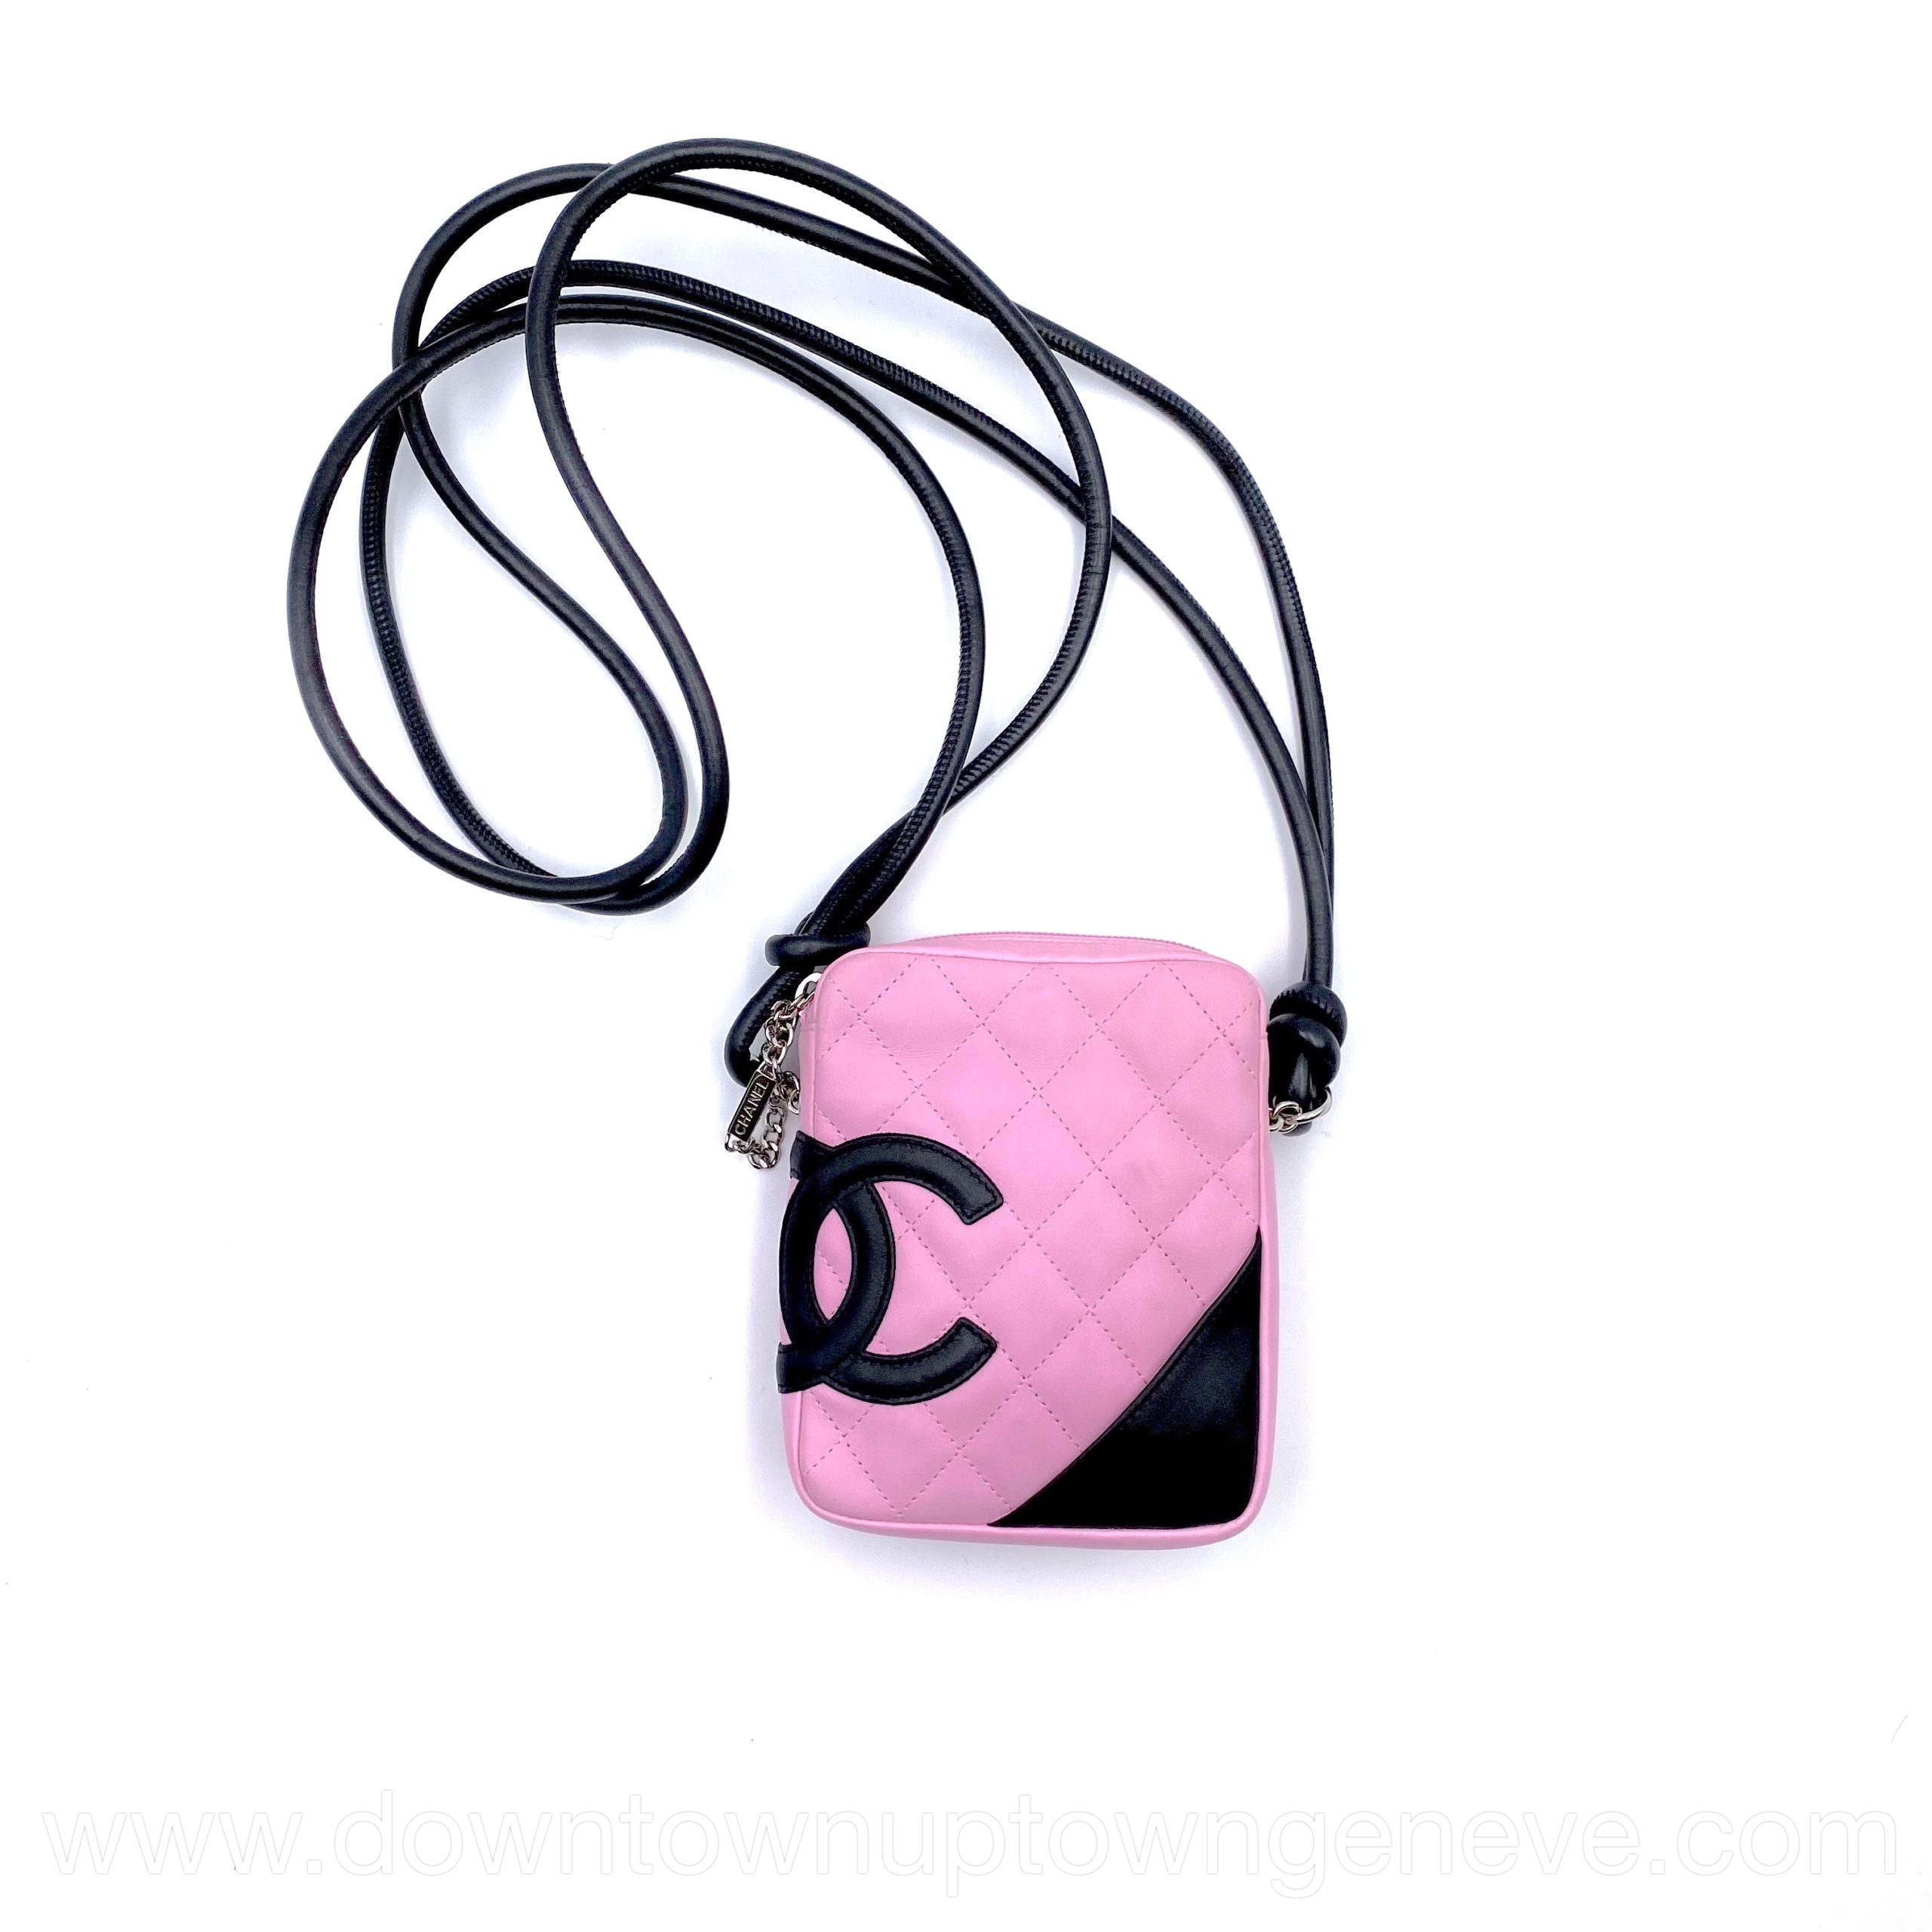 Chanel Cambon mini crossbody bag in pink leather - DOWNTOWN UPTOWN Genève